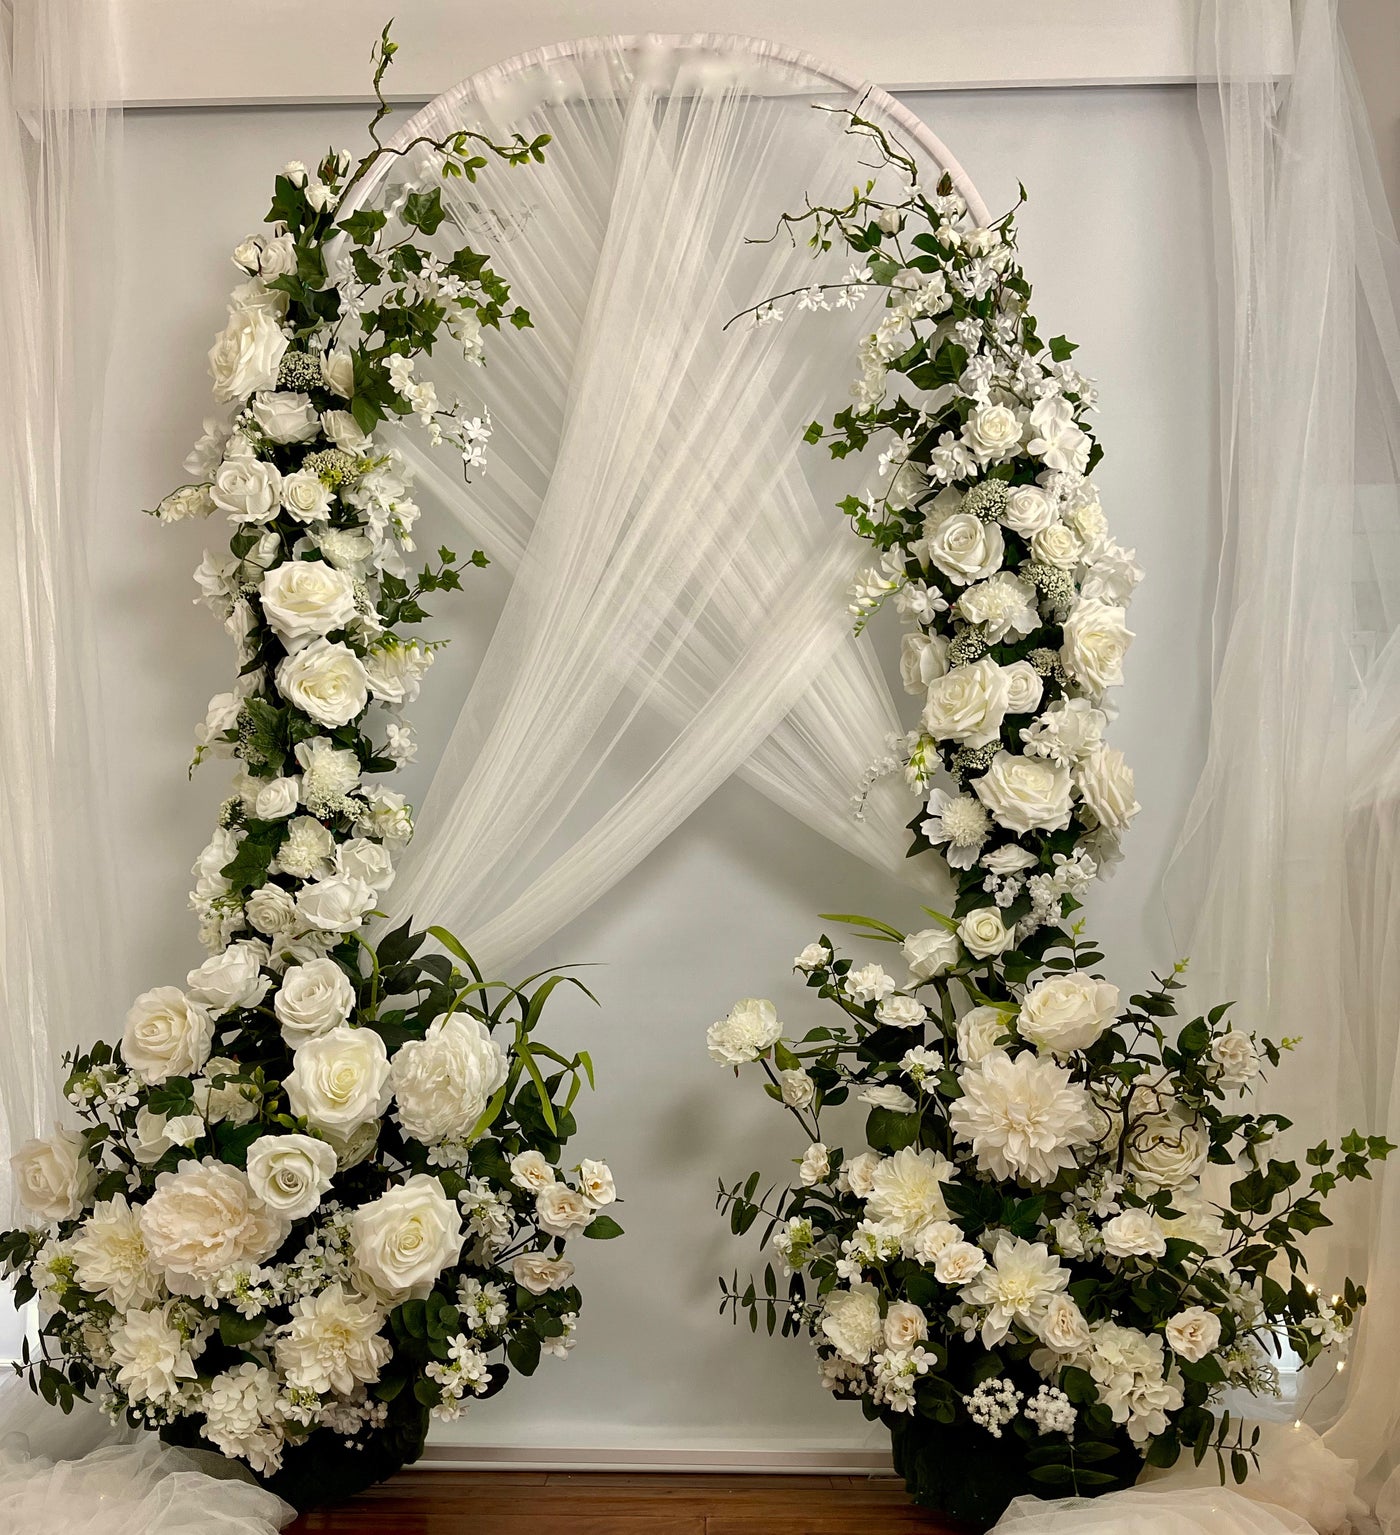 Jumbo White and Ivy/ Bottom of Arch florals